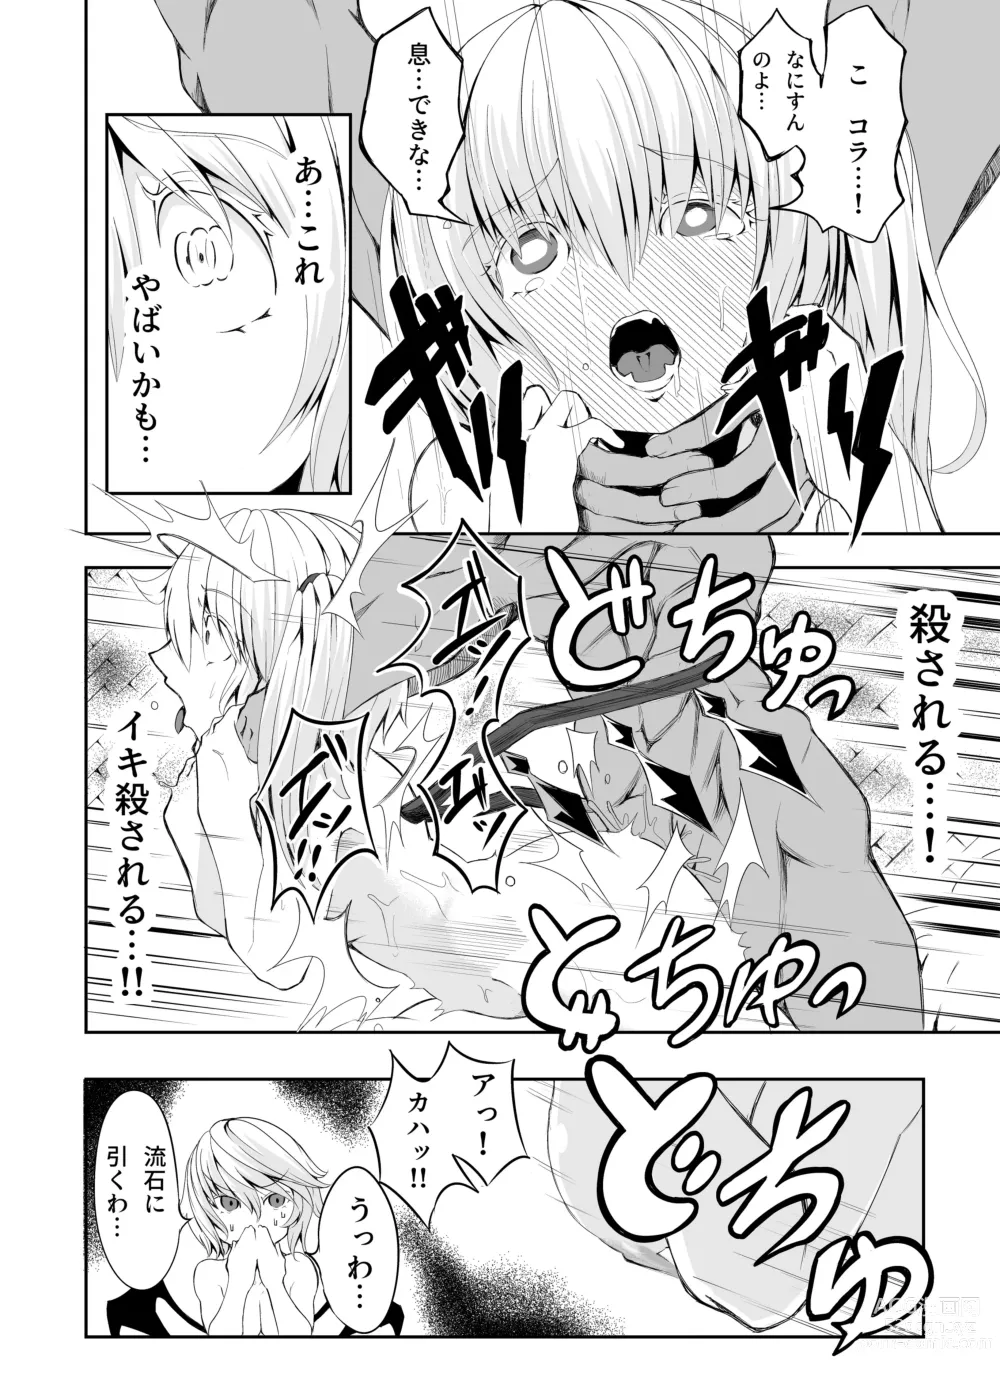 Page 14 of doujinshi Meal of Vampire